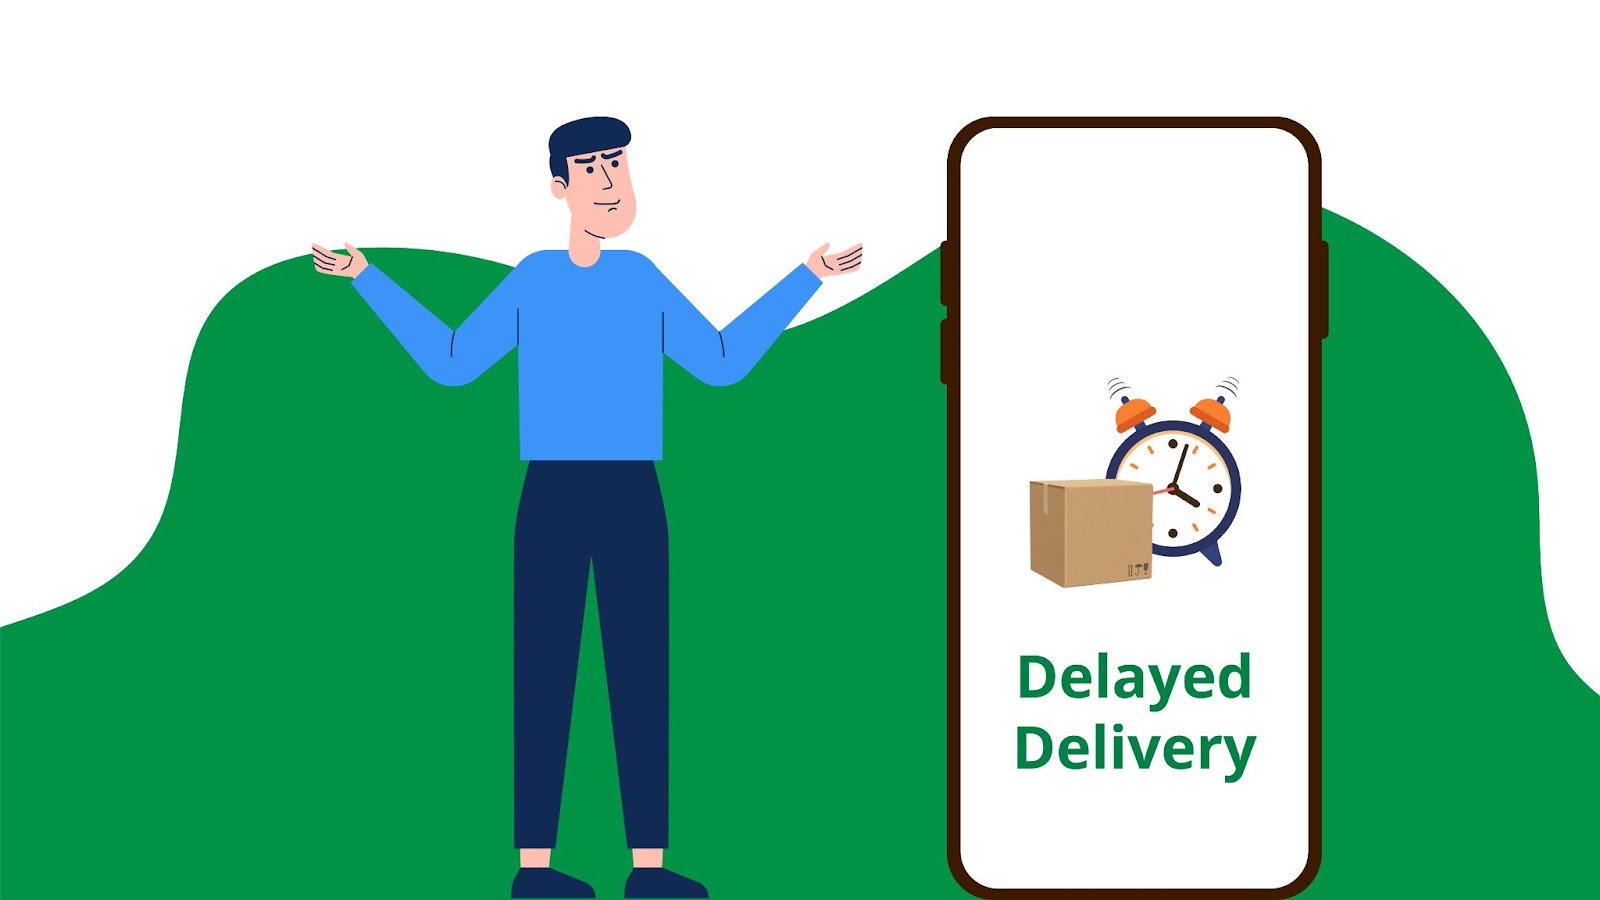 Blog Article Internal-7680 x 4320 px-Not checking if the delivery app promises faster delivery